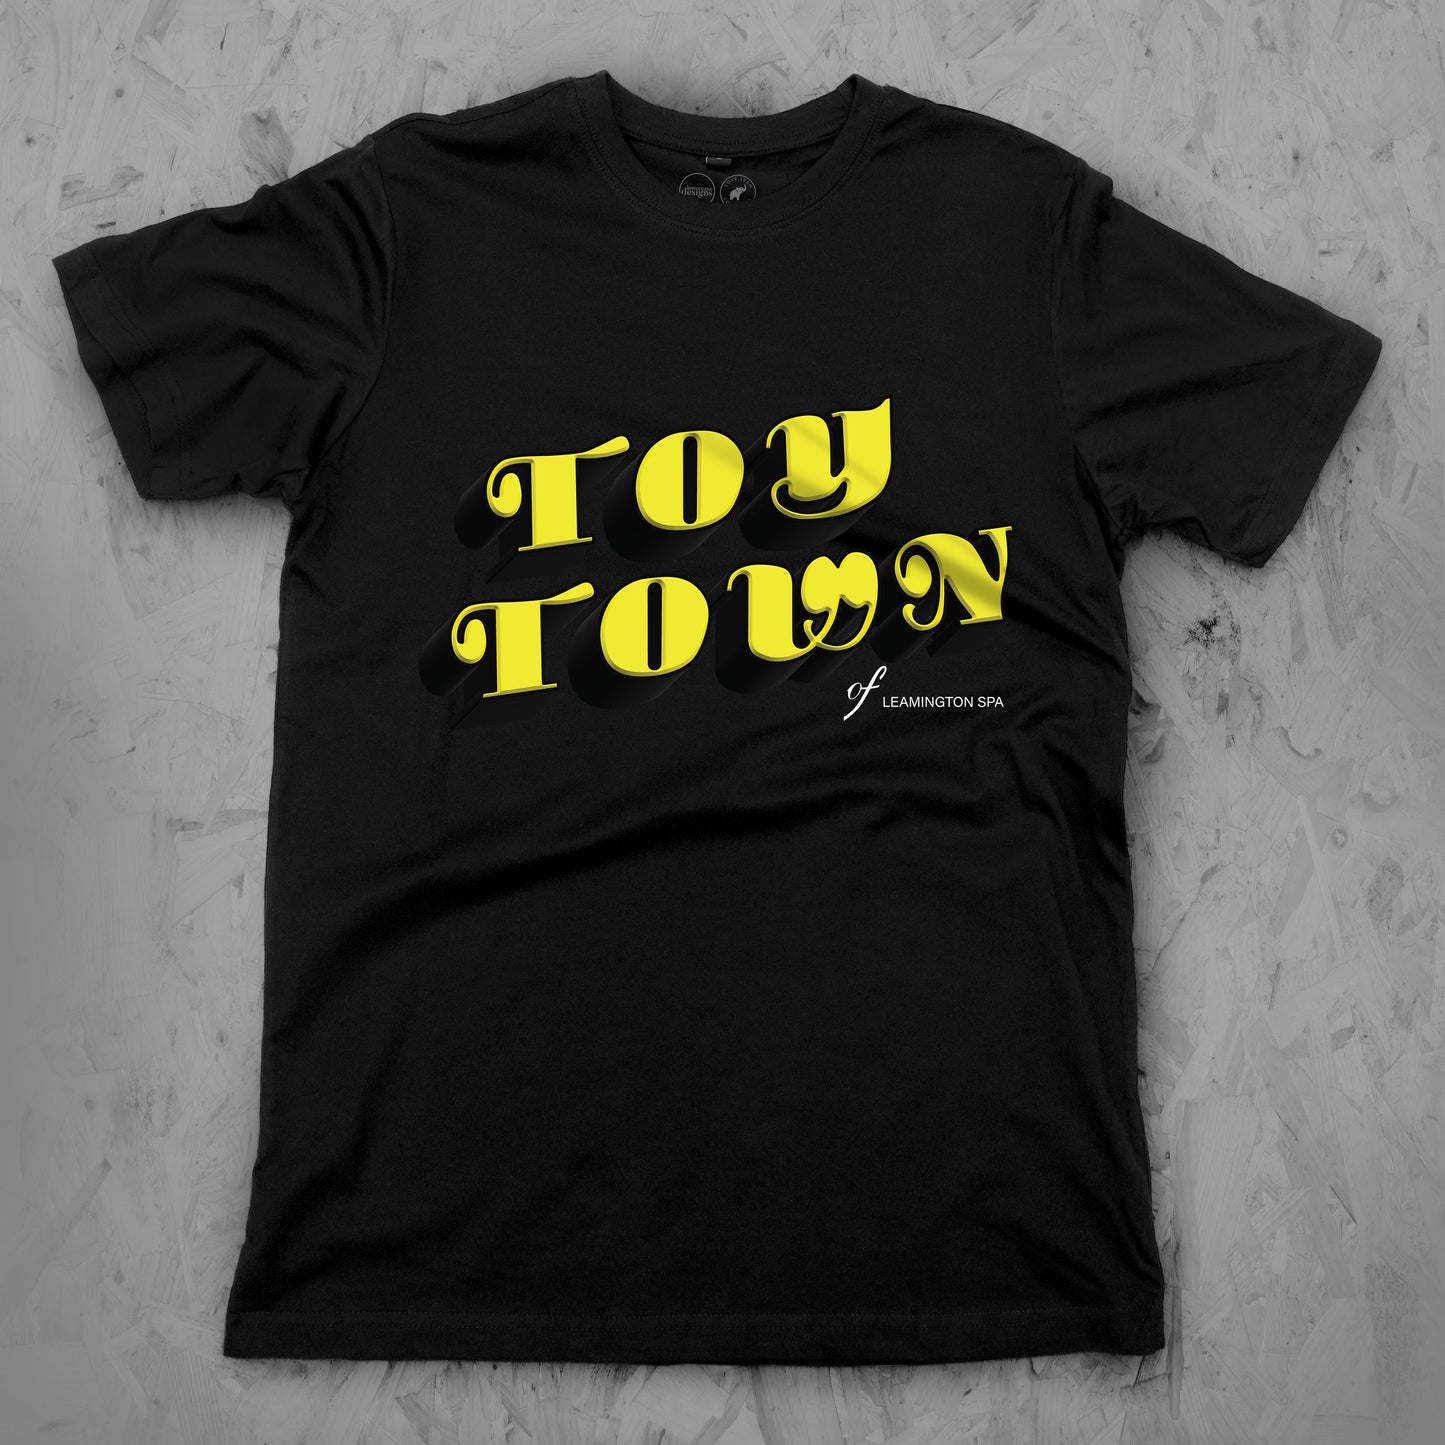 Toy Town 2 Tee Child's sizes 3-14 years